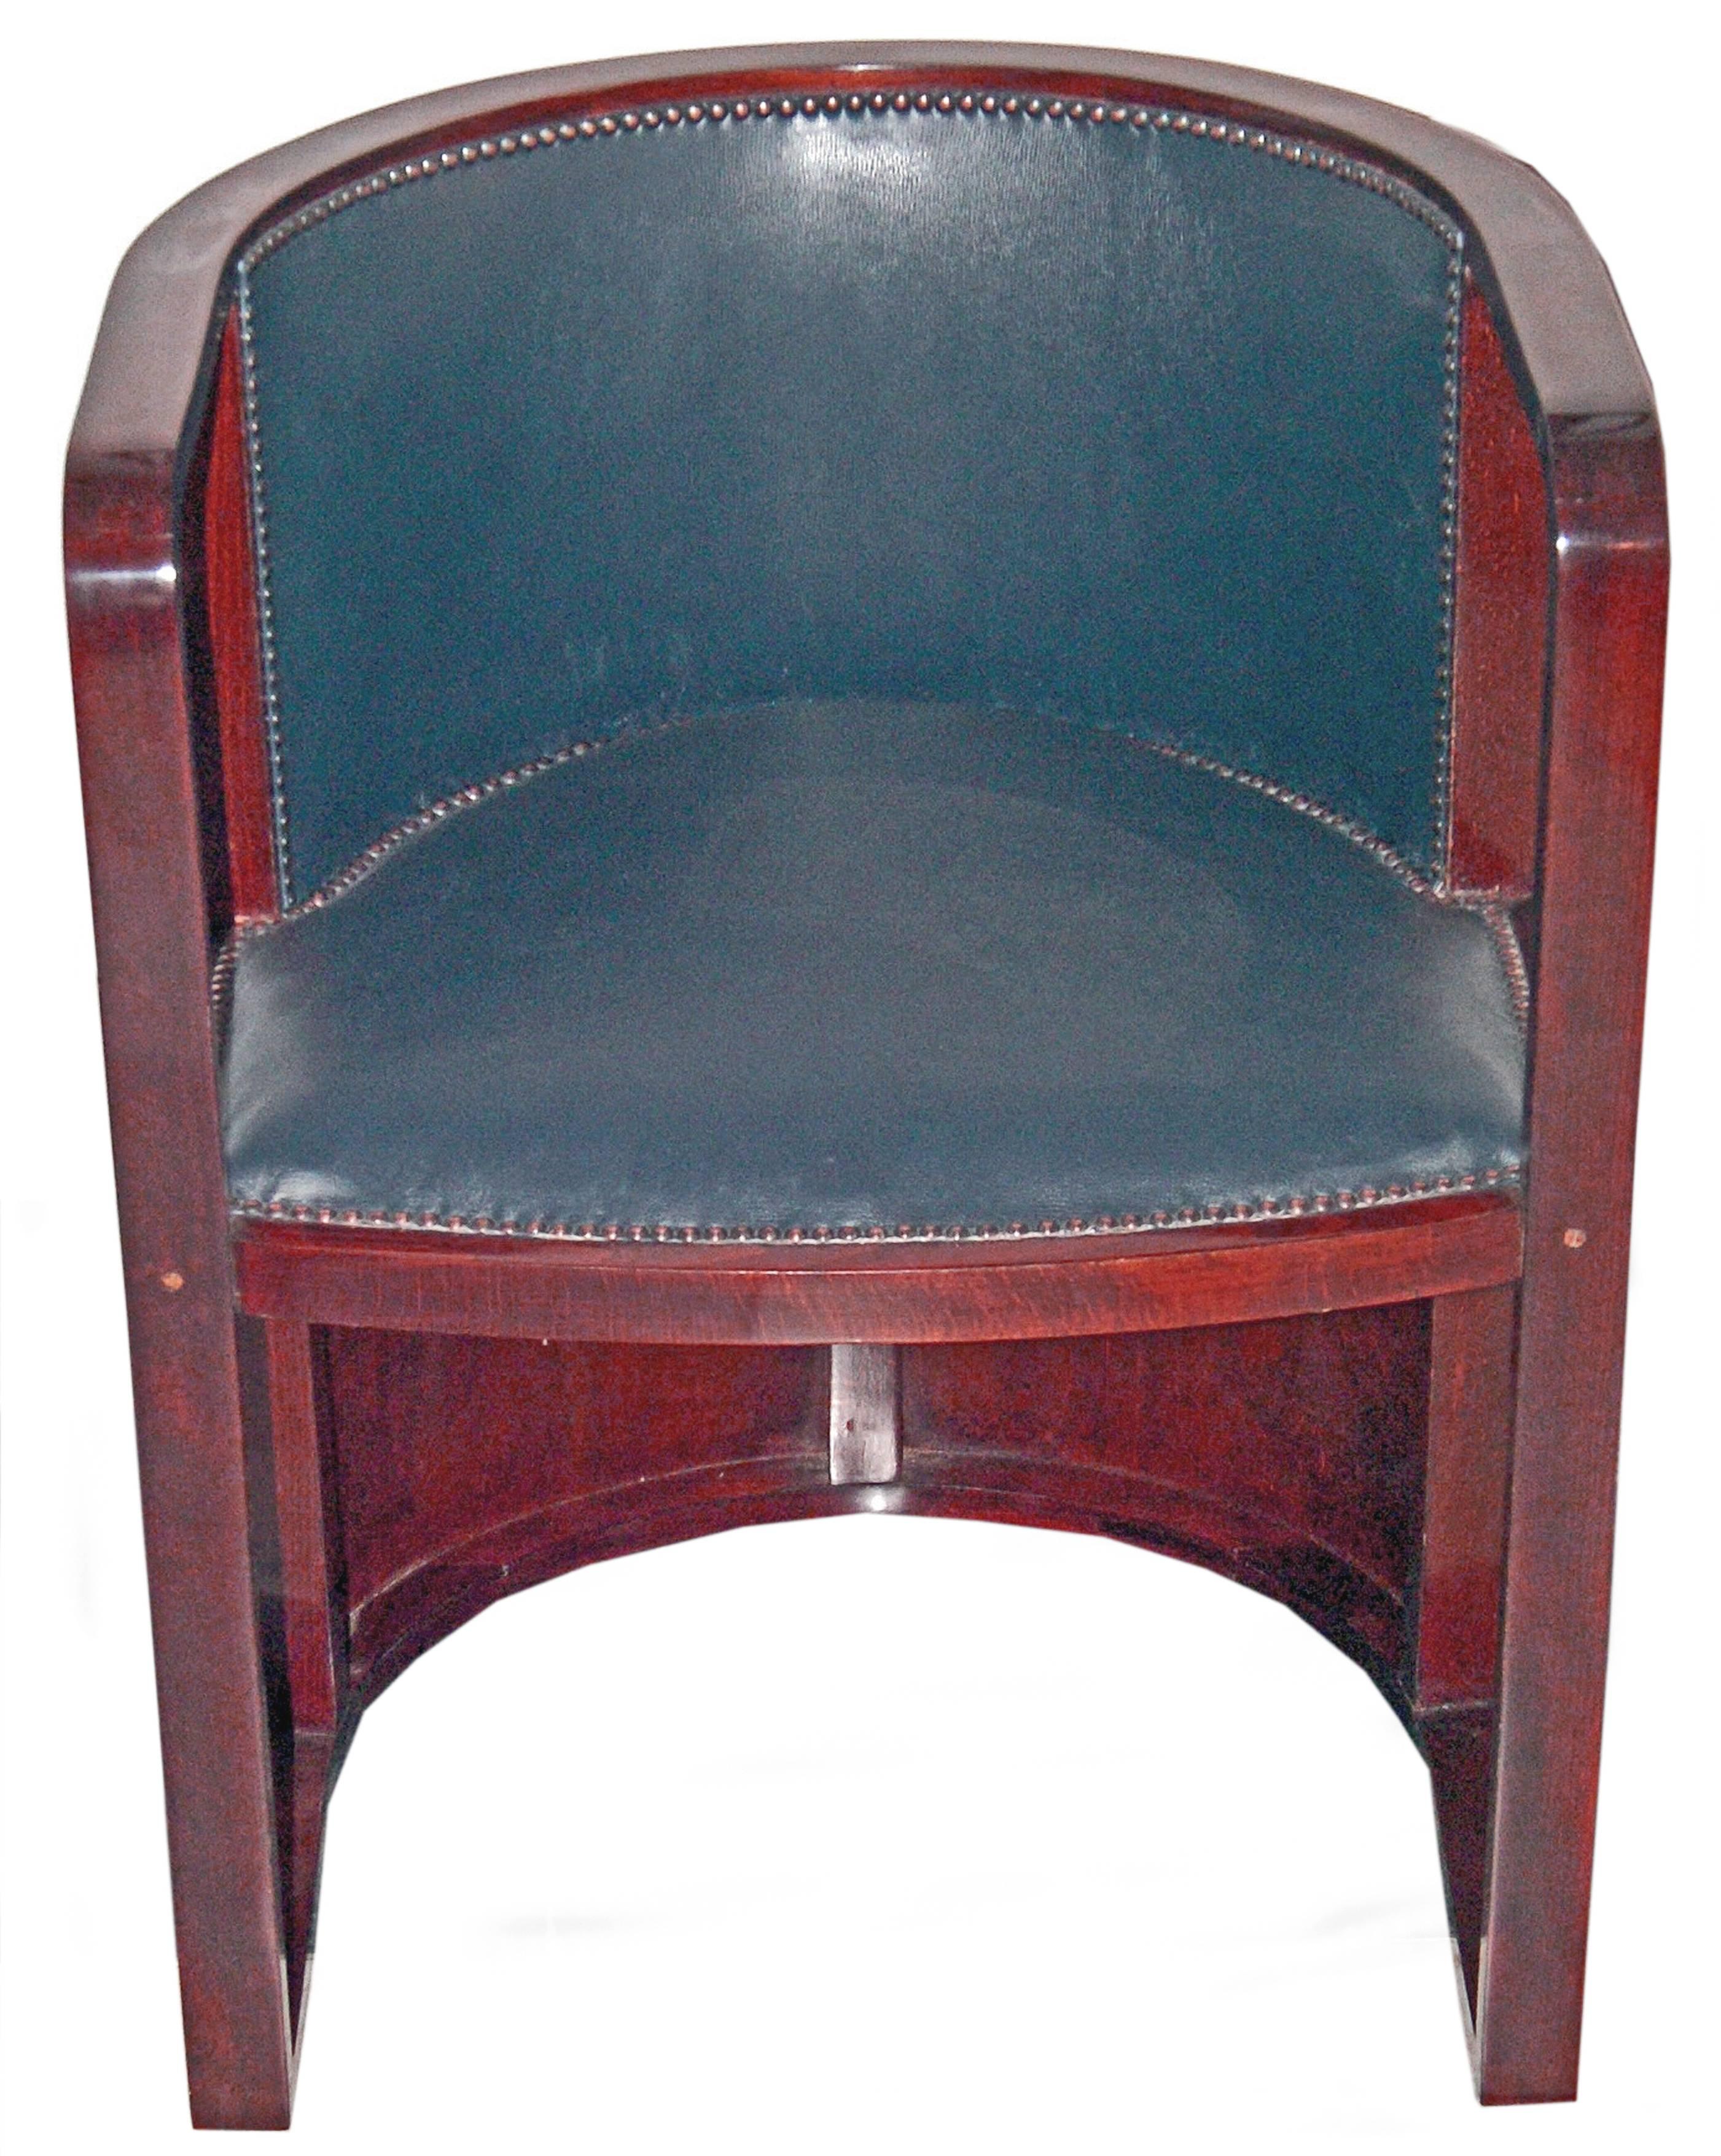 Early 20th Century Josef Hoffmann Armchair Kohn 421 Vienna Mahogany Stained Green Leather Made 1910